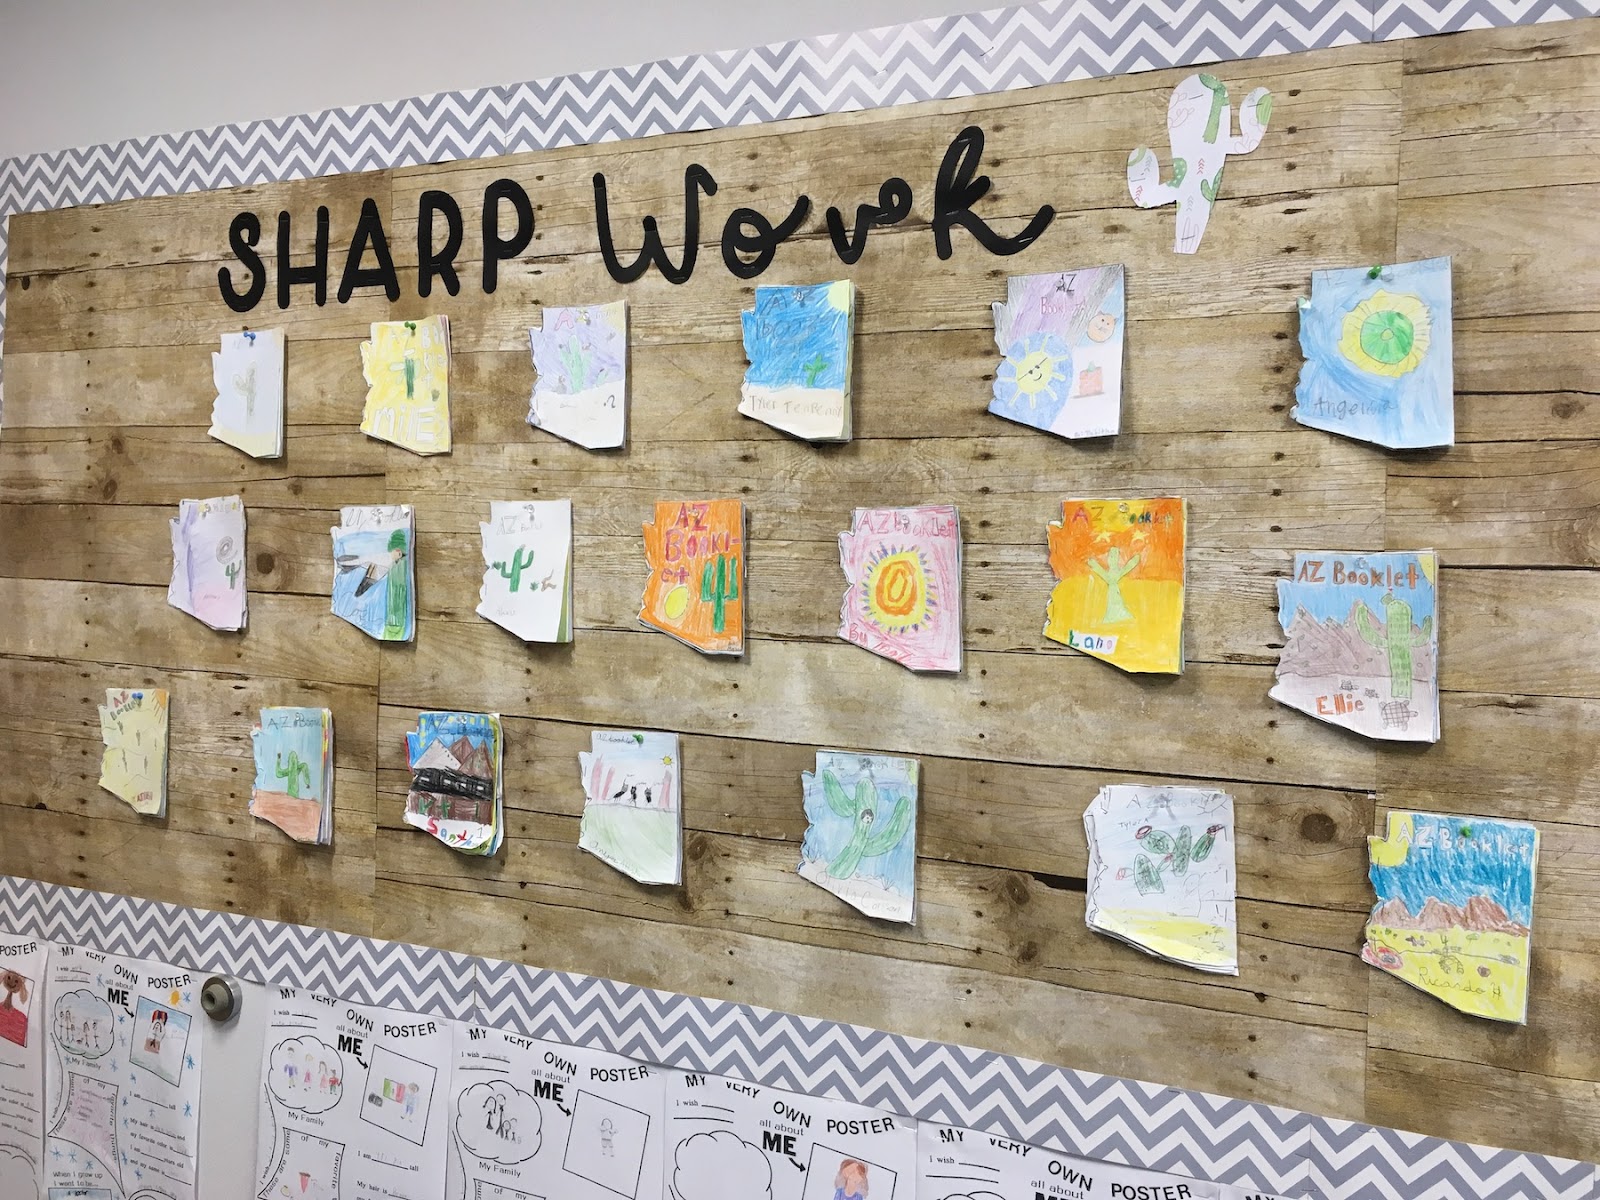 This image shows a bulletin board displaying student work. The title of the bulletin board reads "Sharp Work". 